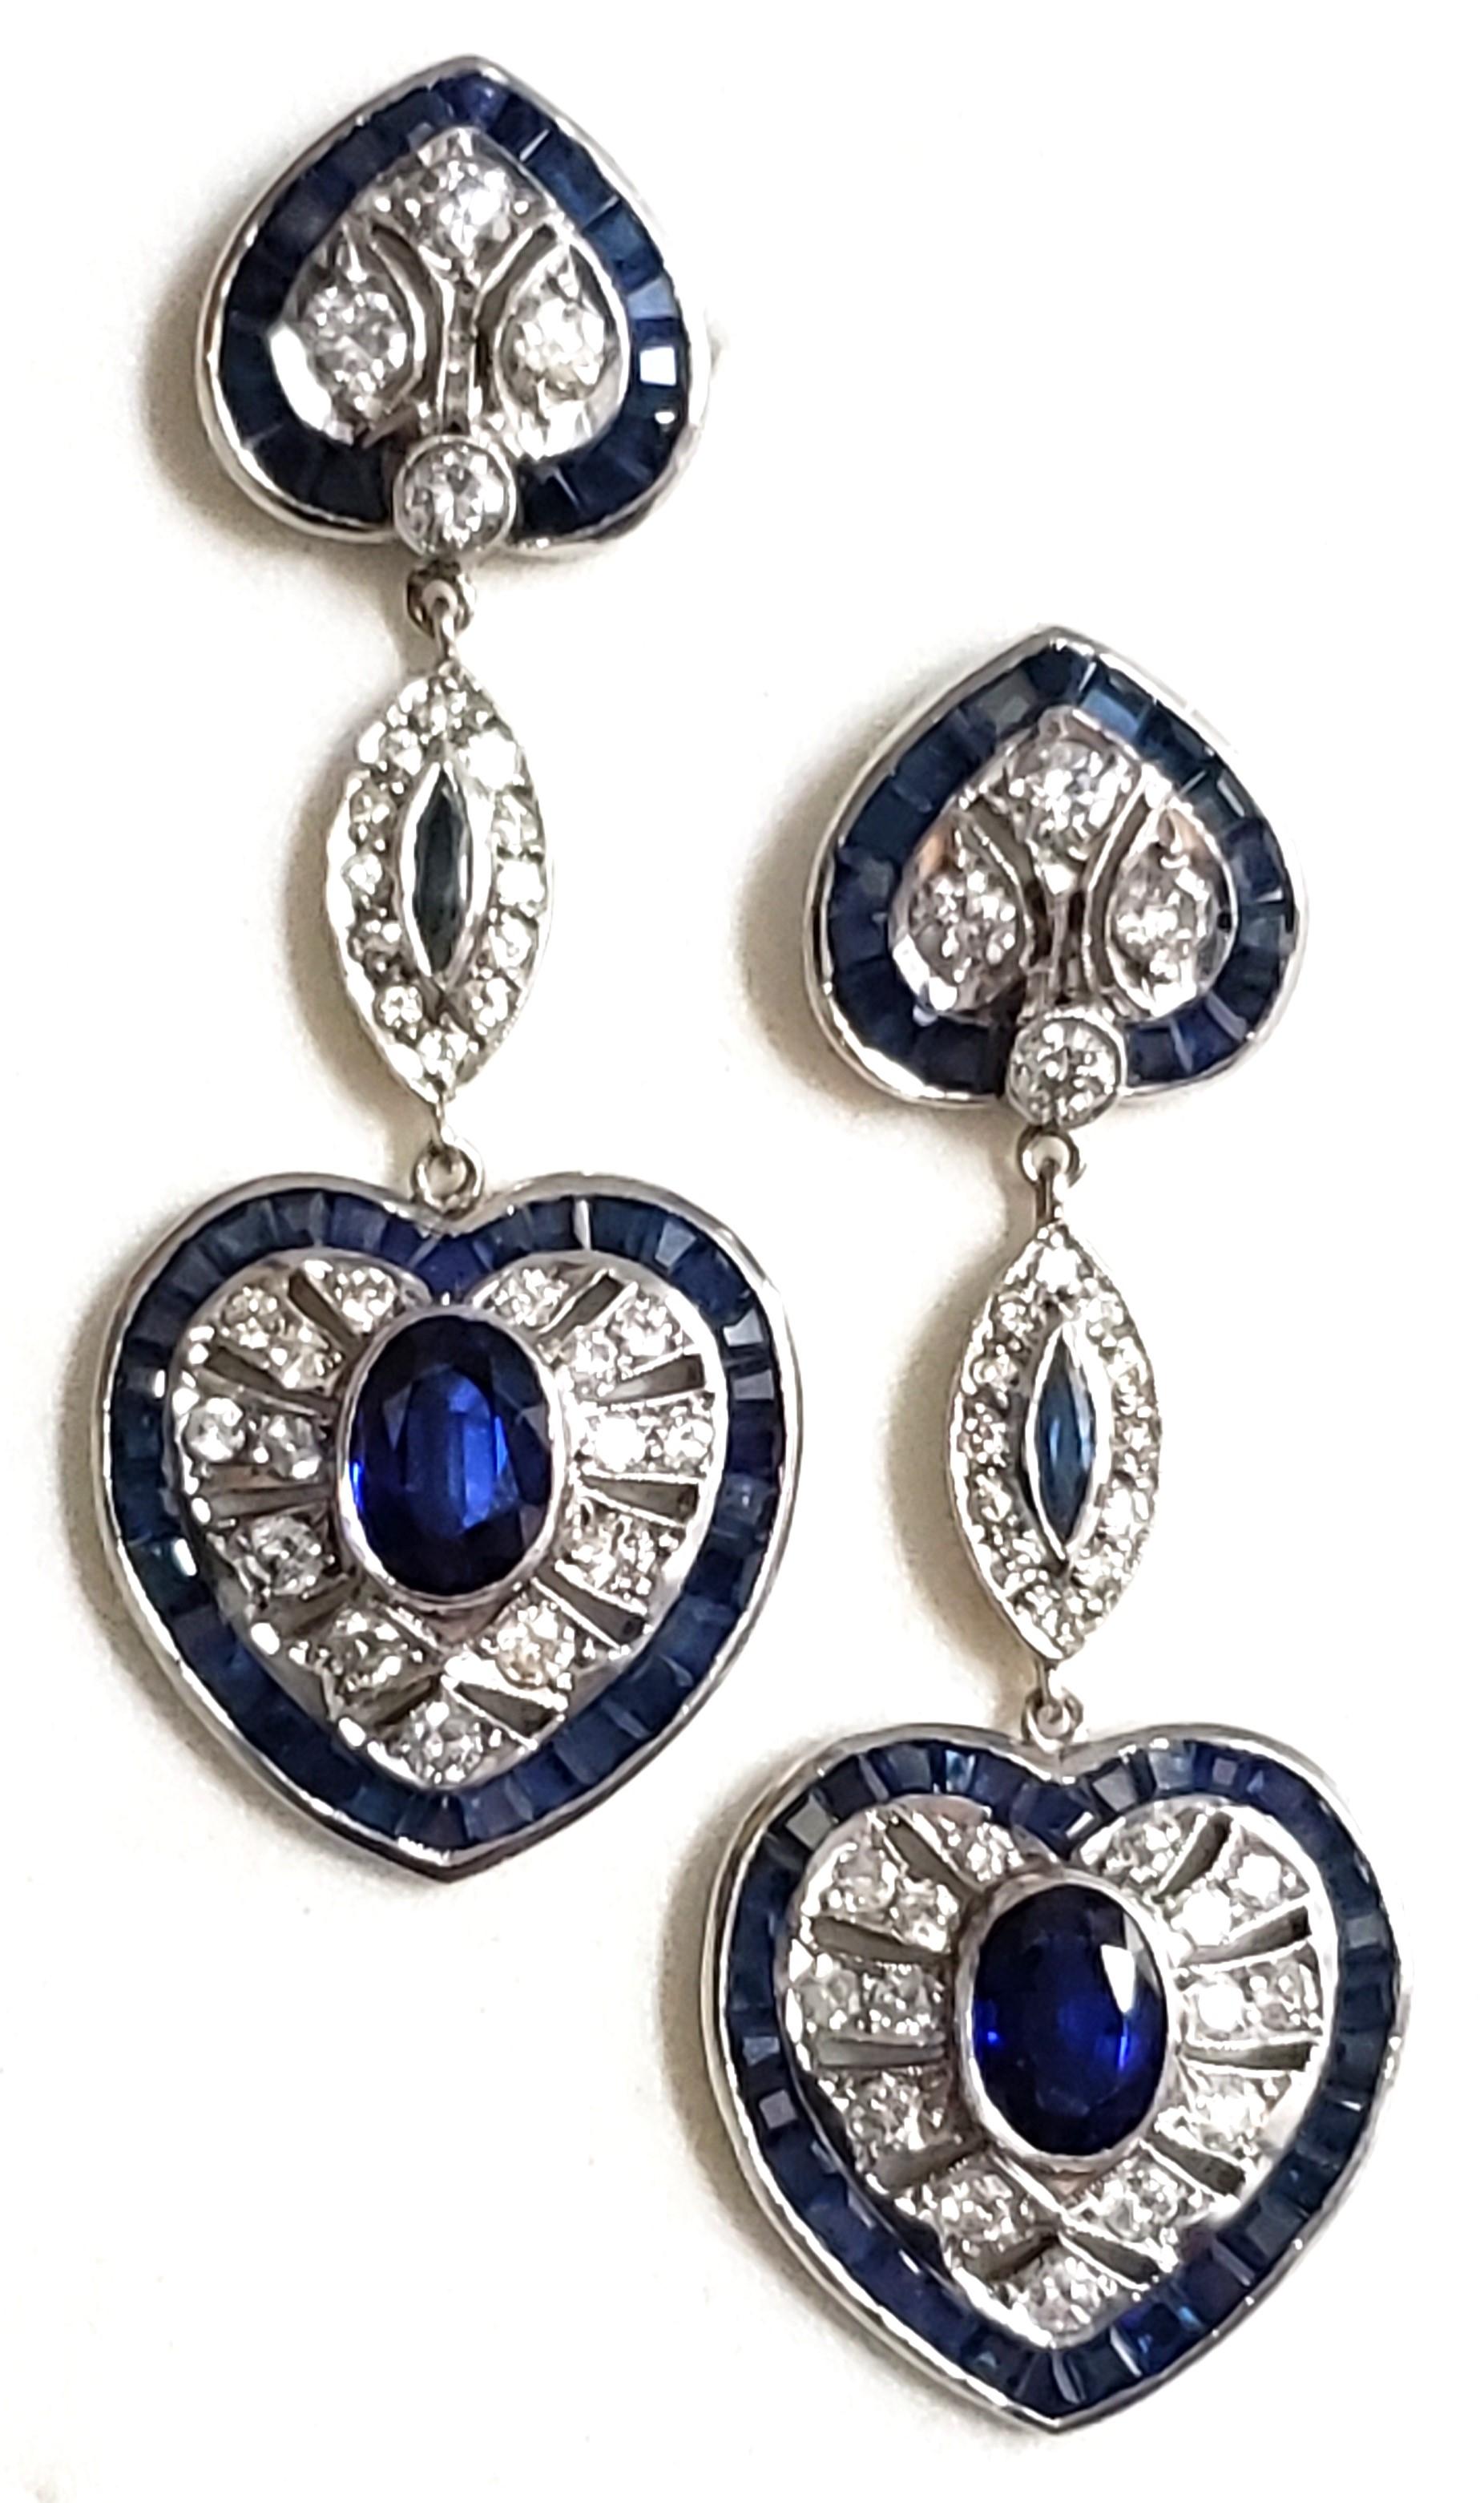 Beautiful Art Deco style filigree earrings most likely South American production - beautiful craftsmanship. Earrings encrusted with round brilliant cut natural diamonds - we estimate 1.00CT total weight (measuring from 1.5 to 2.5MM in diameter. H-I